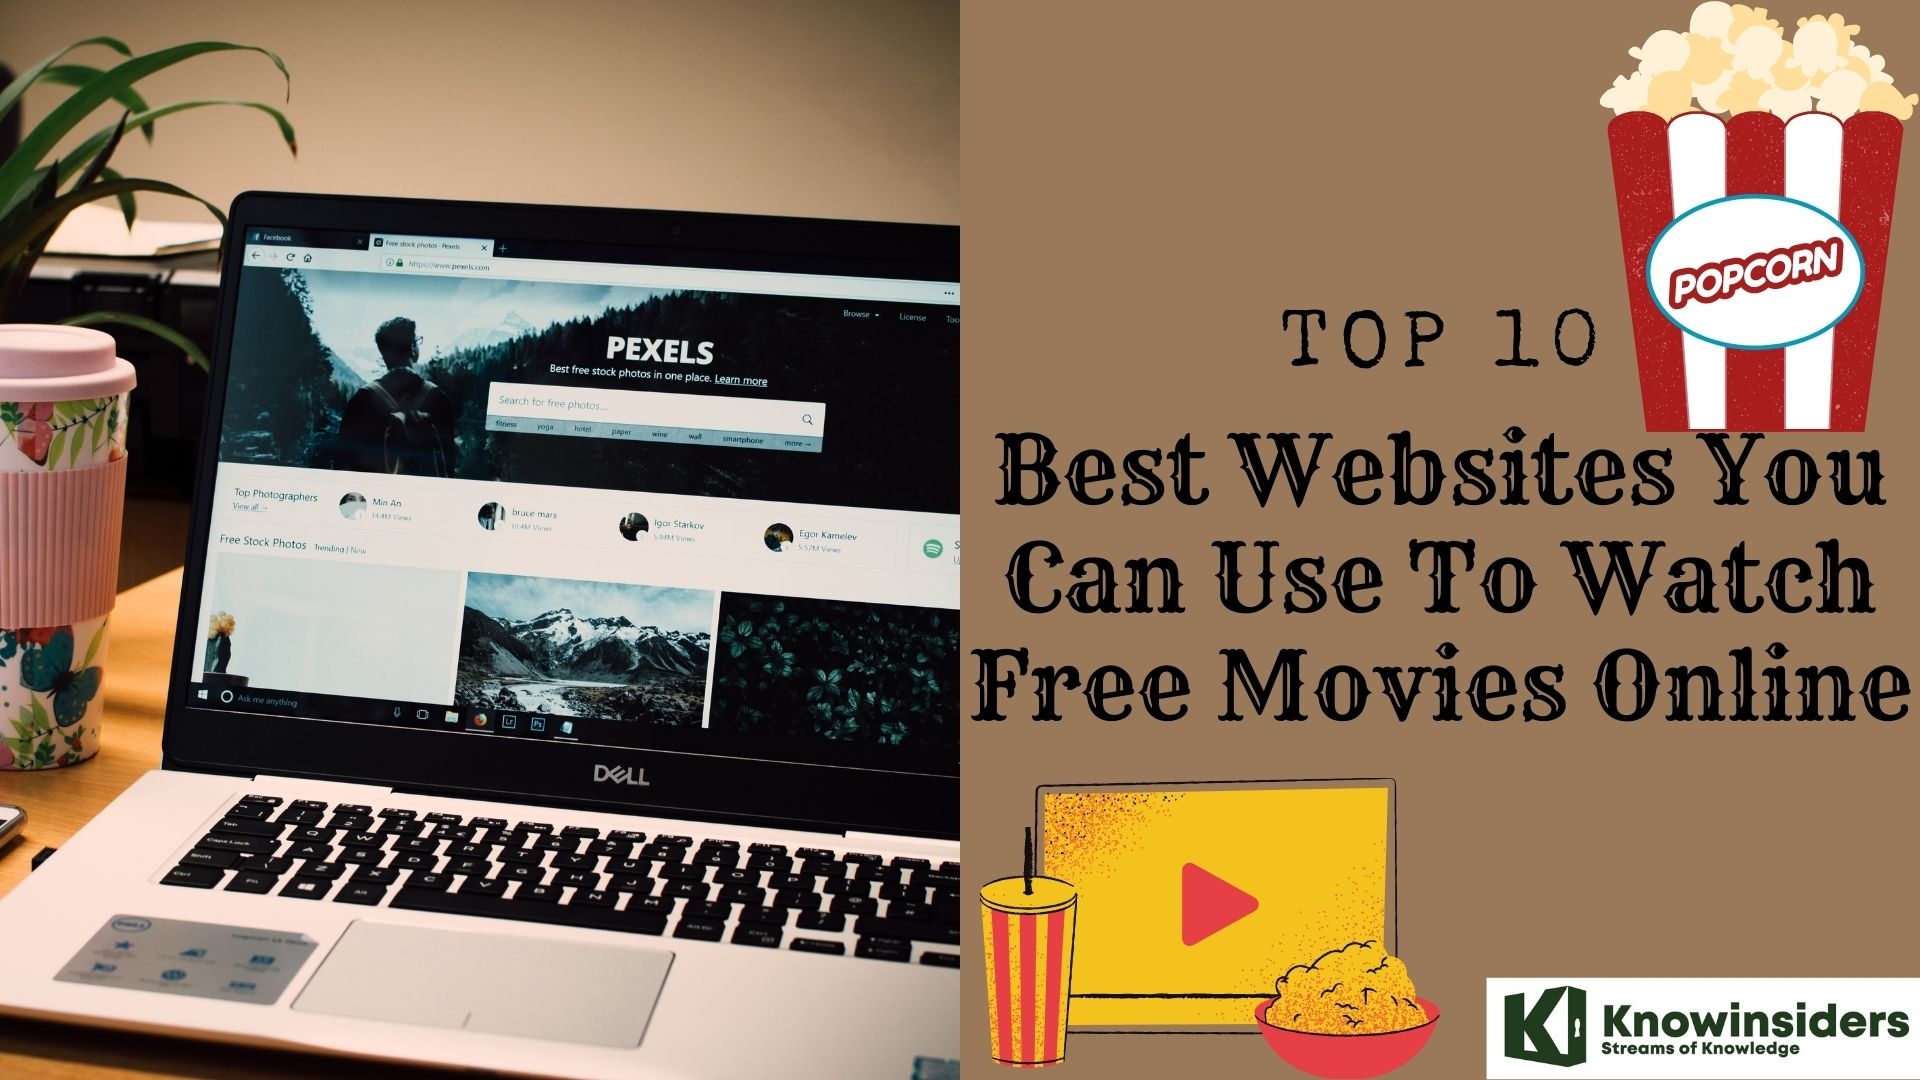 Top 10 Best Websites You Can Use To Watch Free Movies Online